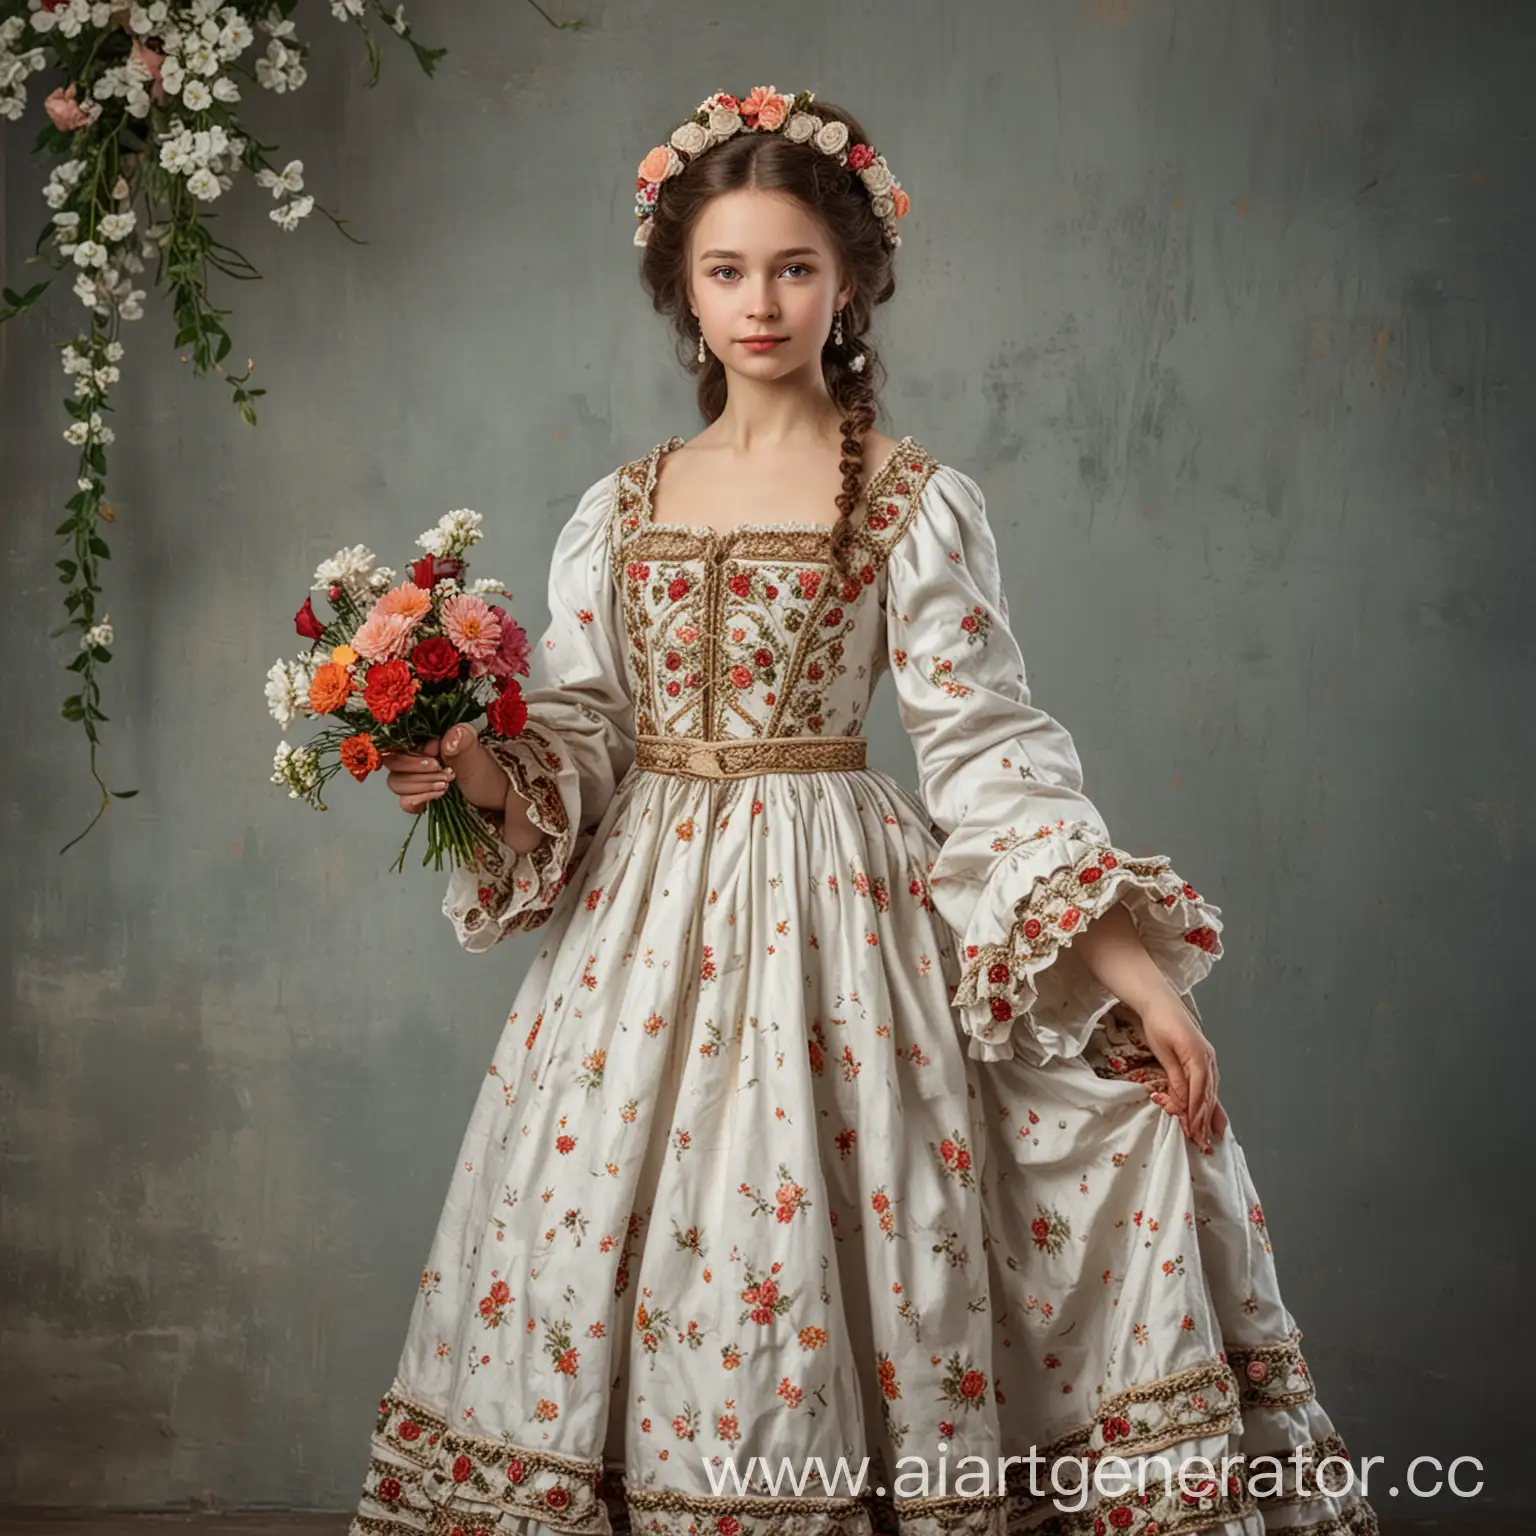 Elegant-Russian-Girl-in-1700s-Dress-with-Flowers